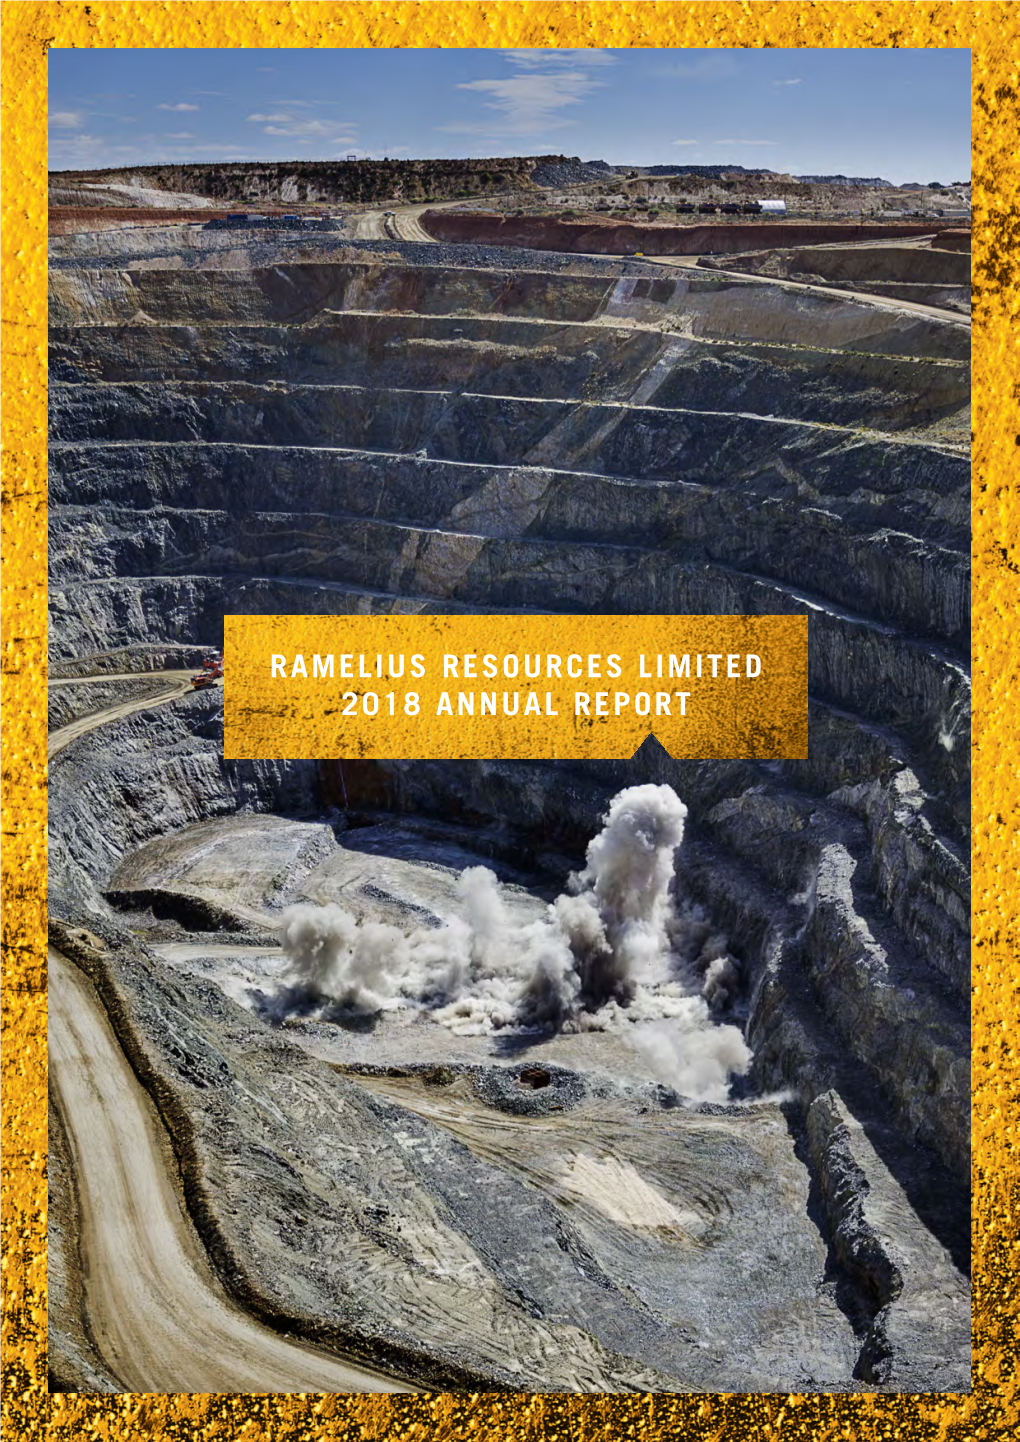 Ramelius Resources Limited 2018 Annual Report Contents